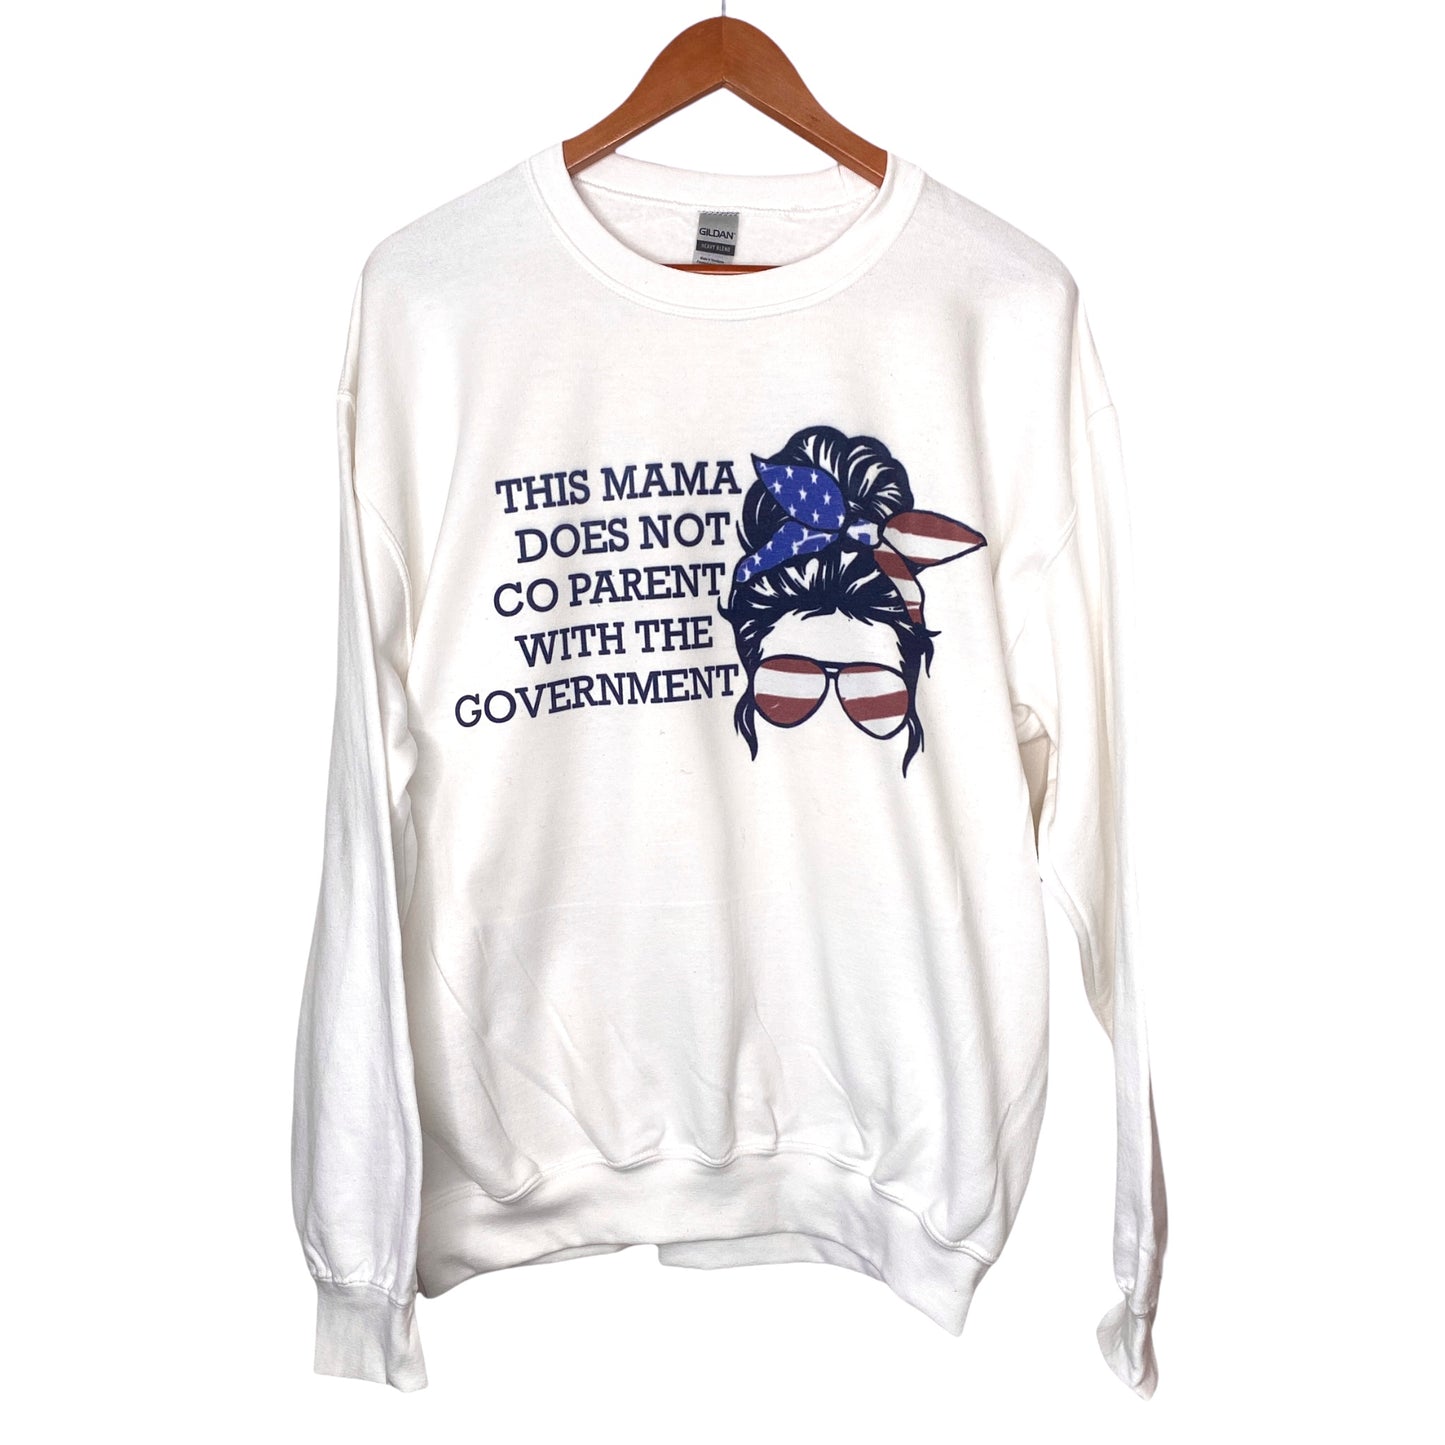 This mama does not co parent with the government sweatshirt or tee shirt